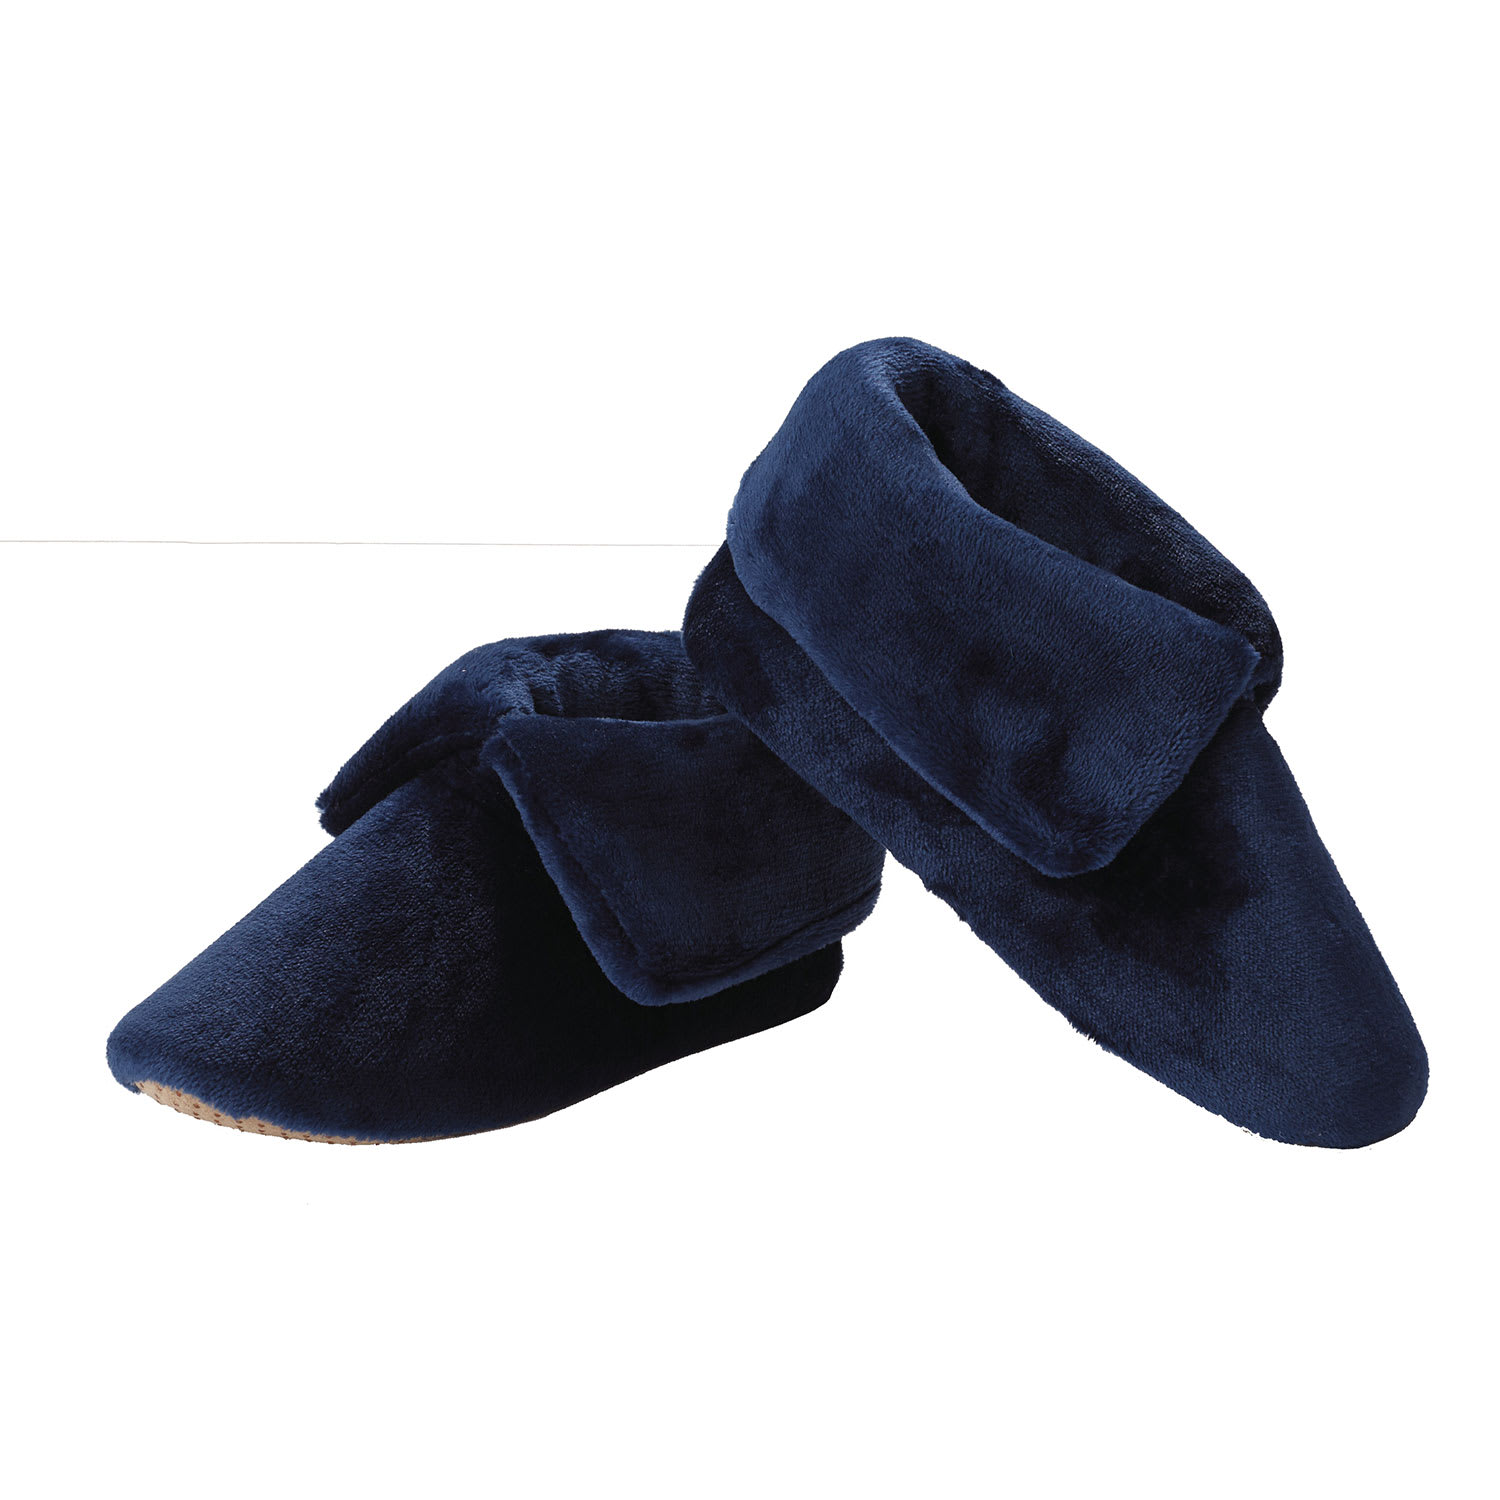 Womens and Mens Deluxe Fleece Slippers - Navy Blue